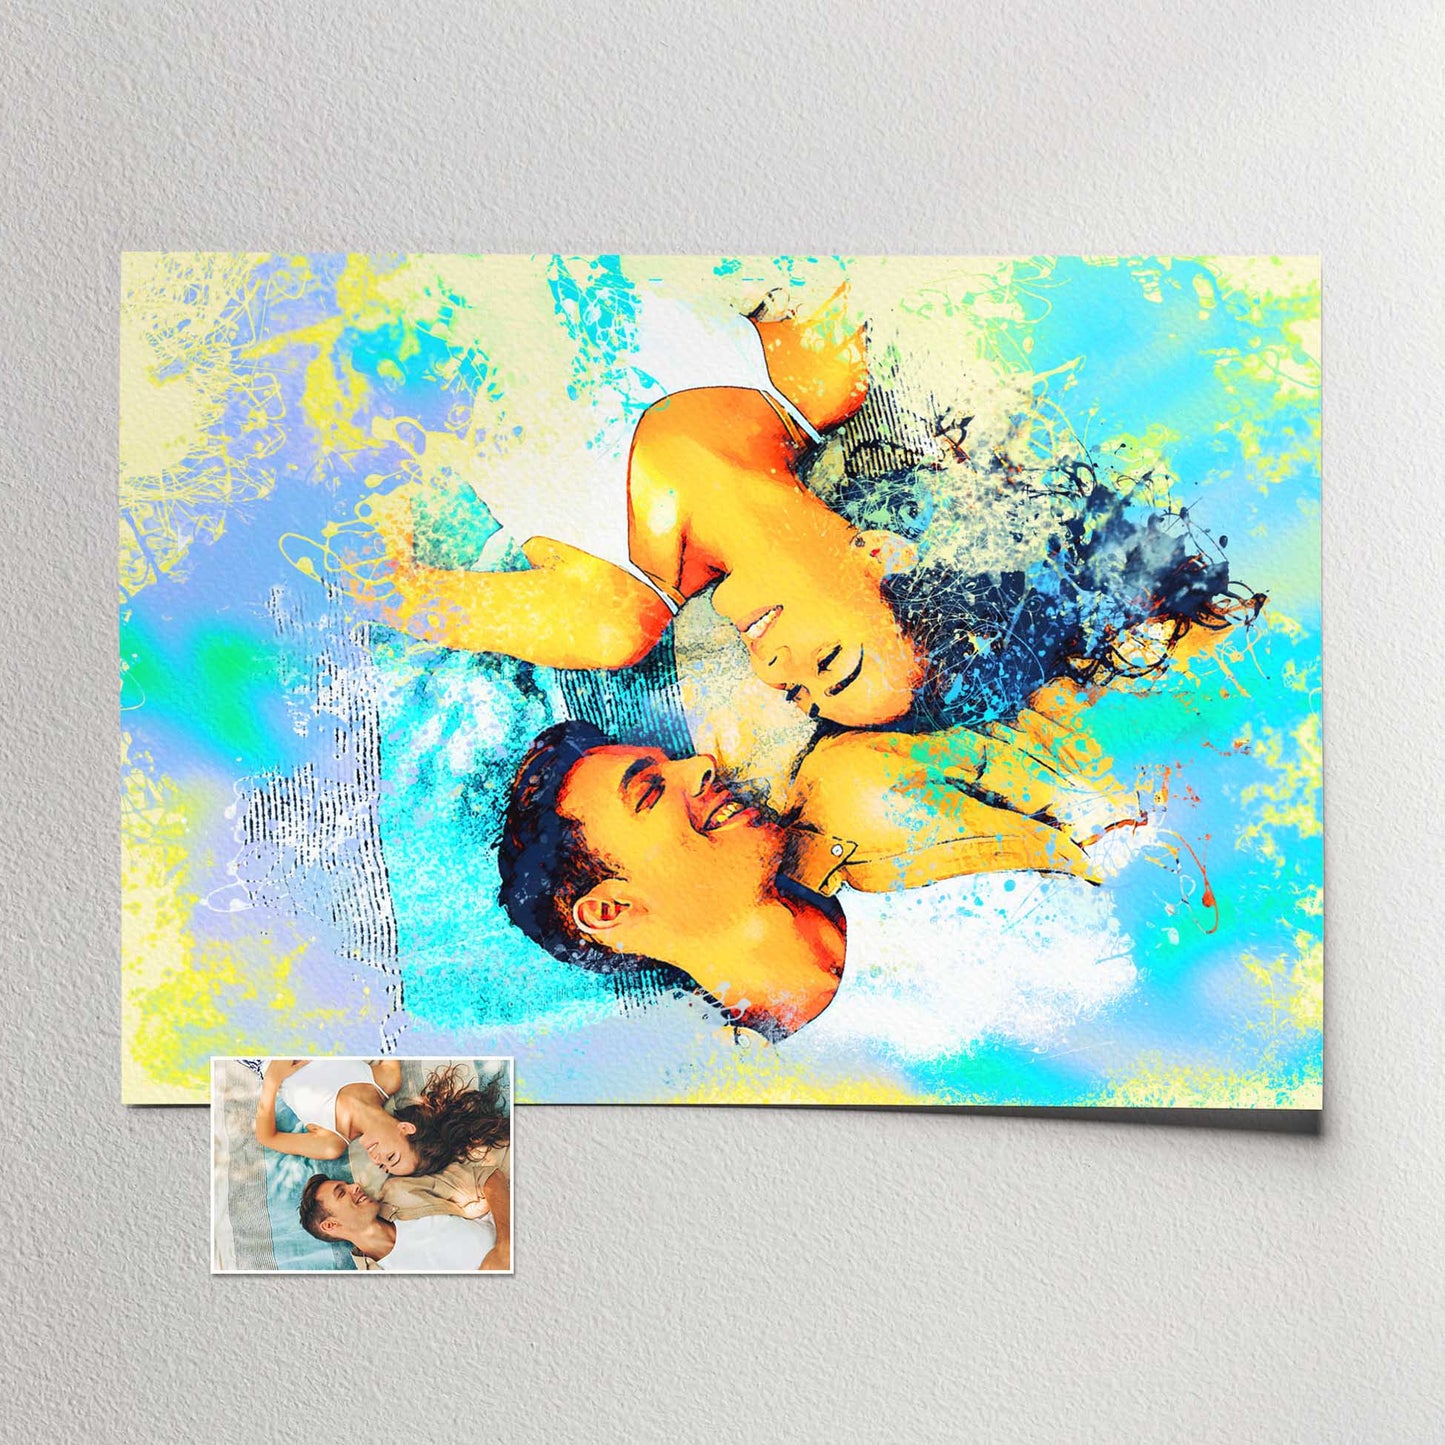 Elevate your living space with a Personalised Watercolor Splash Print. With its energetic and dynamic paint splash effect, this artwork captures the essence of a joyful and lively party. Its classic watercolor style and gallery-quality print